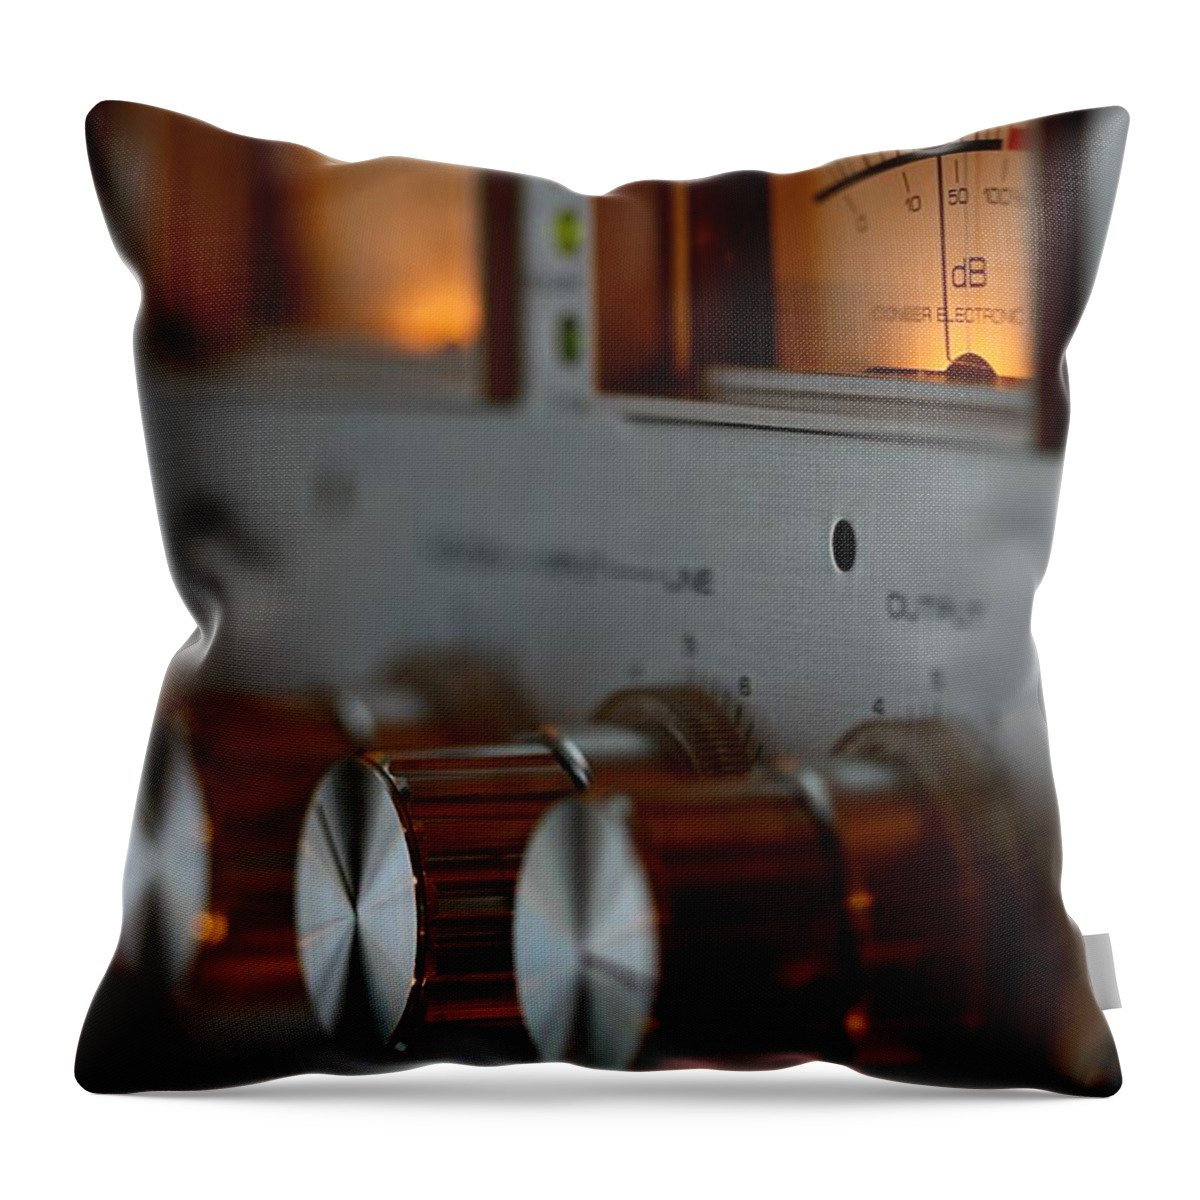 Music Throw Pillow featuring the photograph Ctf-1000 by Gustavo Ciancio